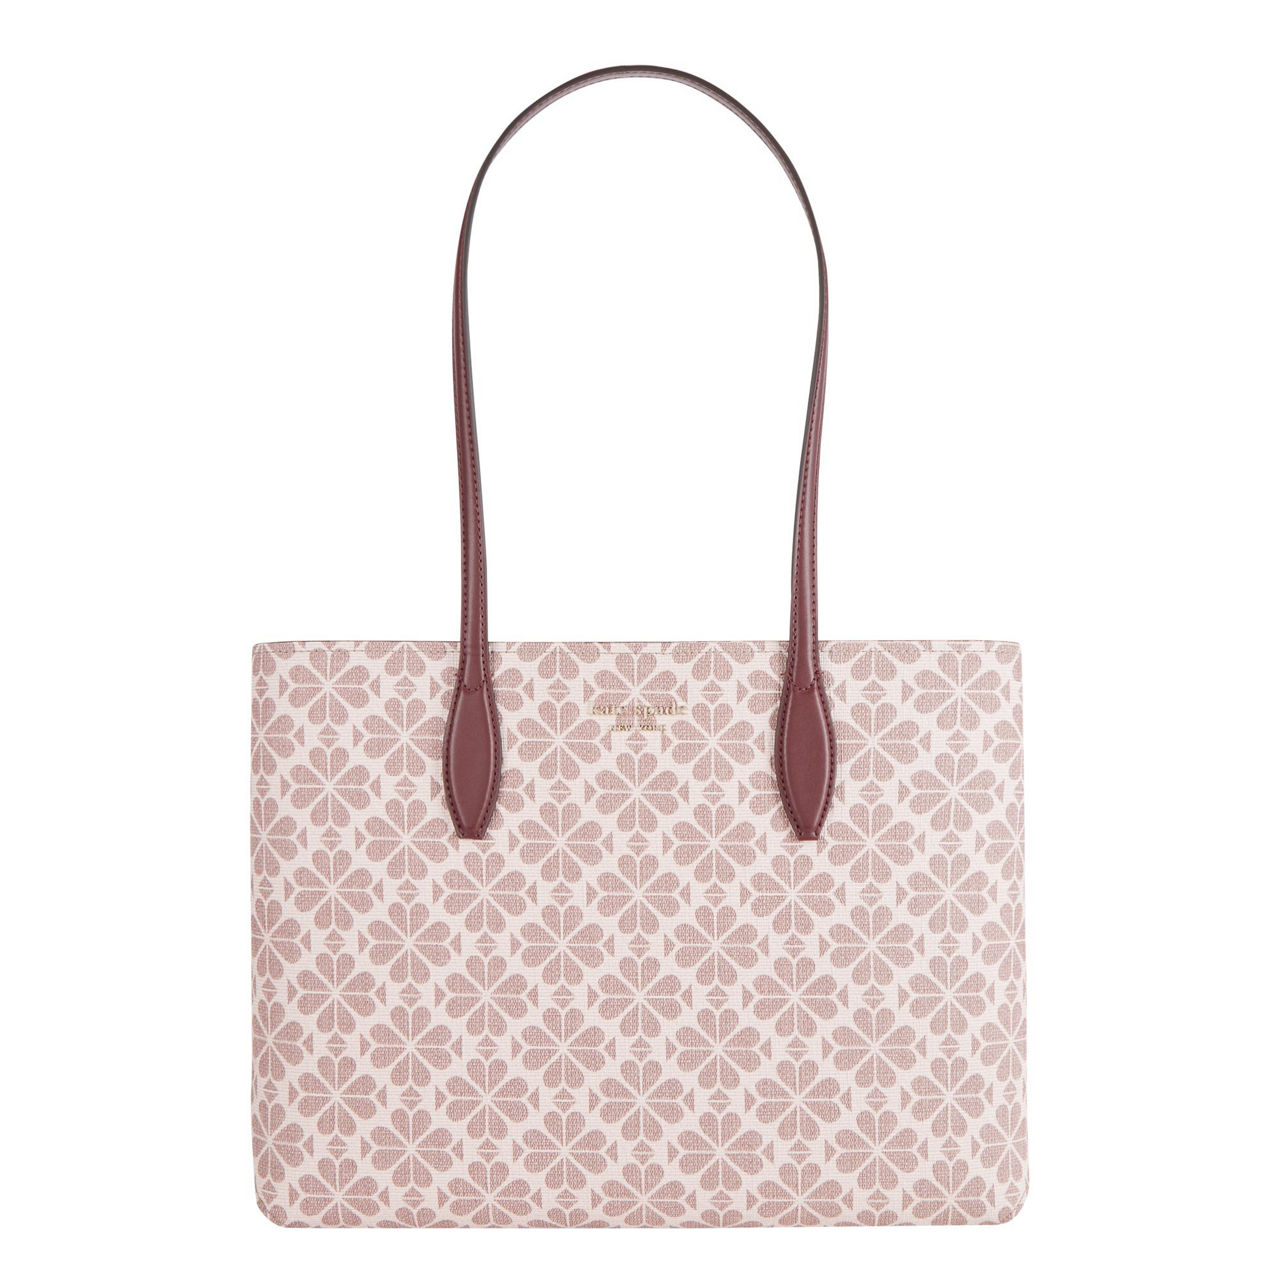 Kate Spade New York All Day Spade Flower Coated Canvas Tote Bag